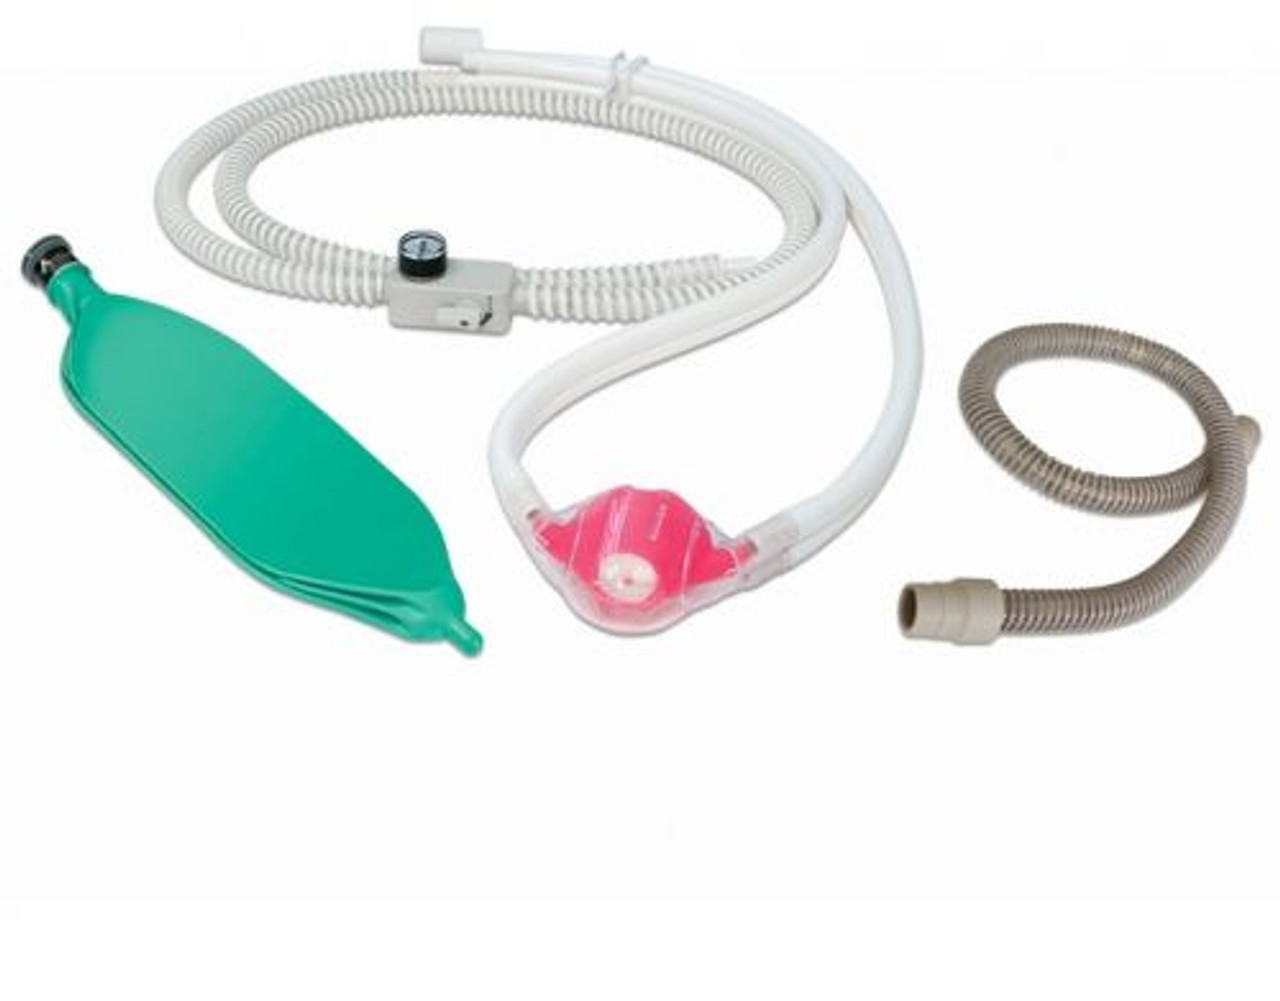 Crosstex Accutron Pip+ Scavenging Circuits for Standard Bag Tee, with Large Multi-Use Nasal Mask